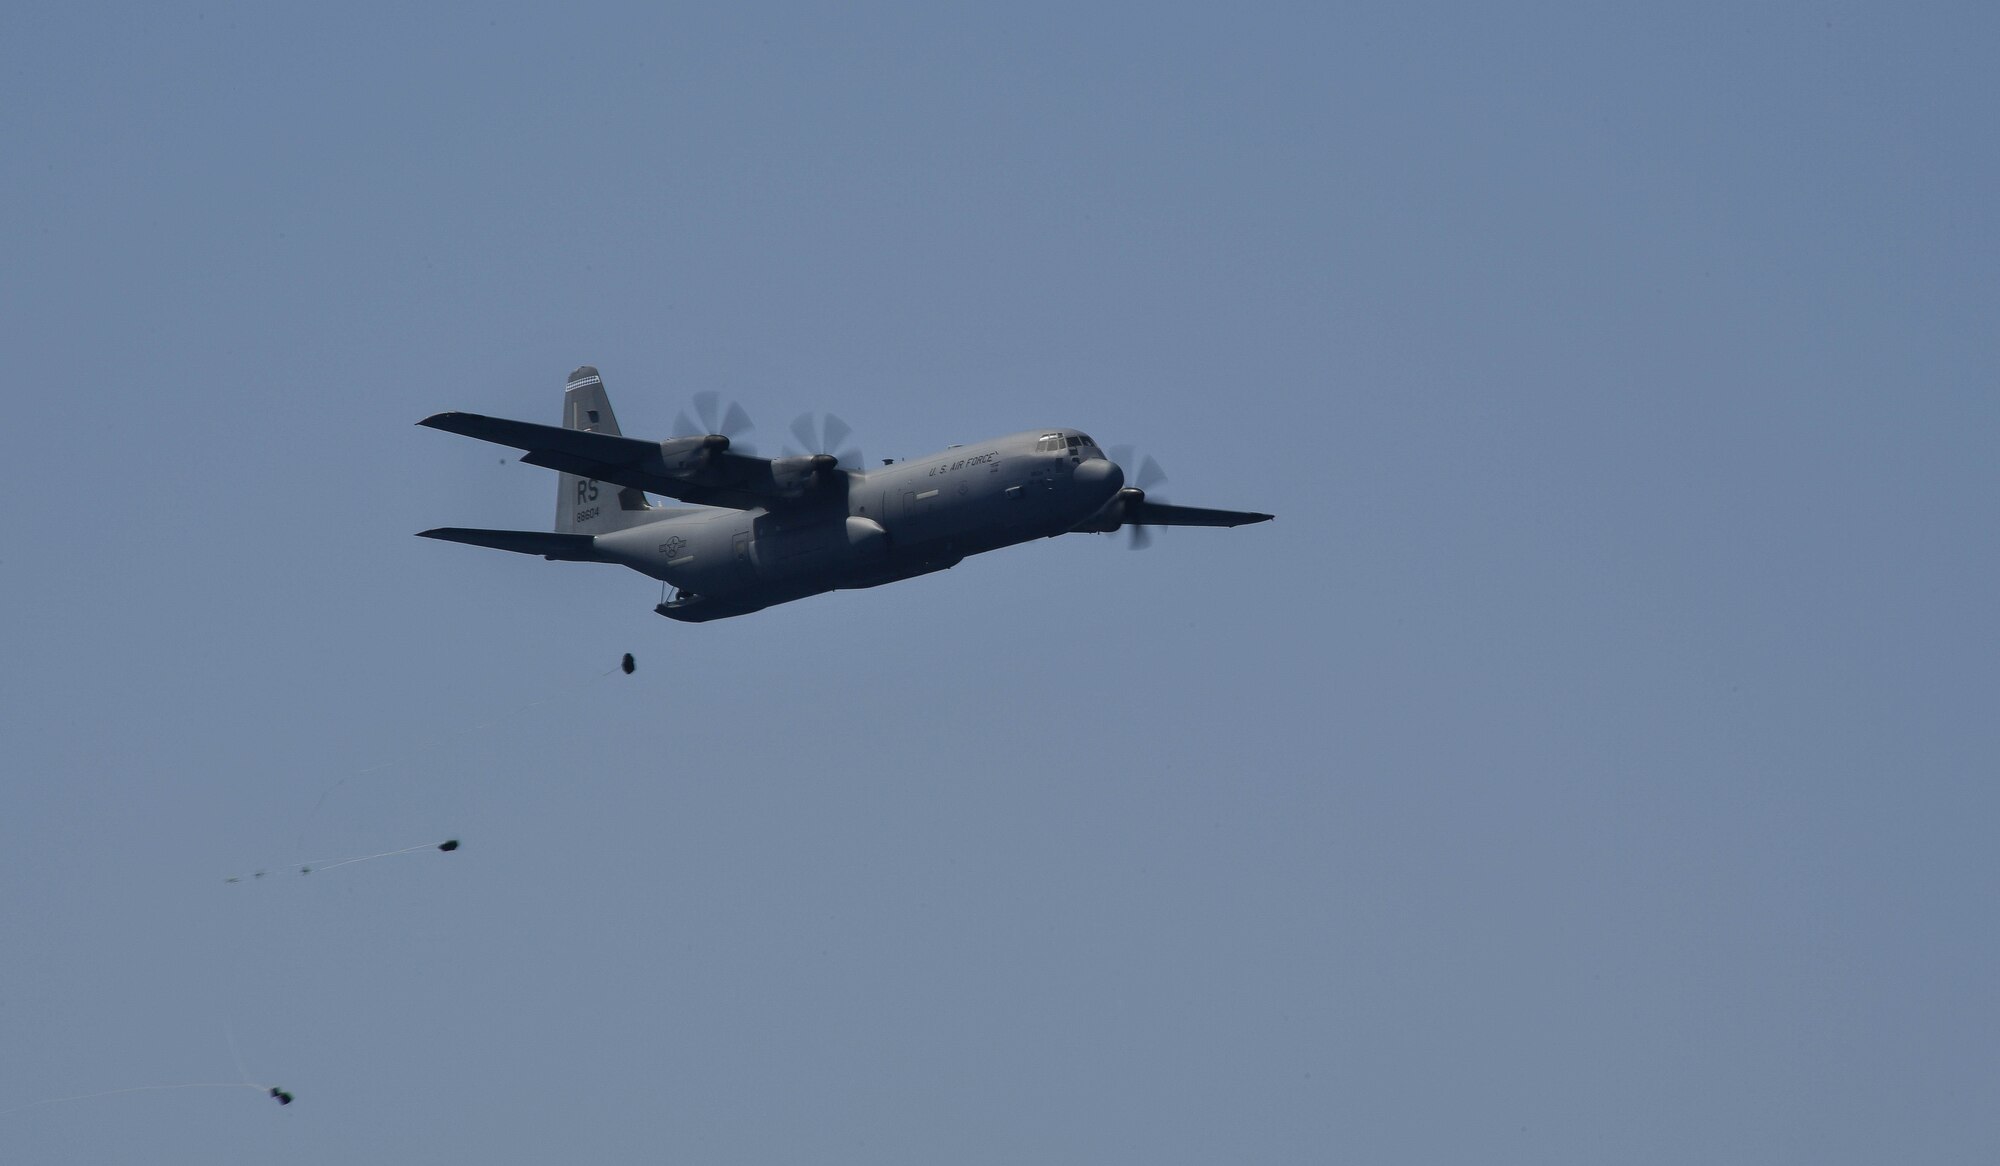 A U.S. Air Force C-130J Super Hercules drops a sea-rescue kit during Exercise Stolen Cerberus IV near Elefsis Air Base, Greece, April 27, 2017. The kit consisted of four connected duffle bags that would provide a raft, medicinal supplies, food, and water for individuals stranded at sea. Combined exercises such as these enhance the interoperability capabilities and skills among allied and partner armed forces. (U.S Air Force photo by Senior Airman Tryphena Mayhugh)